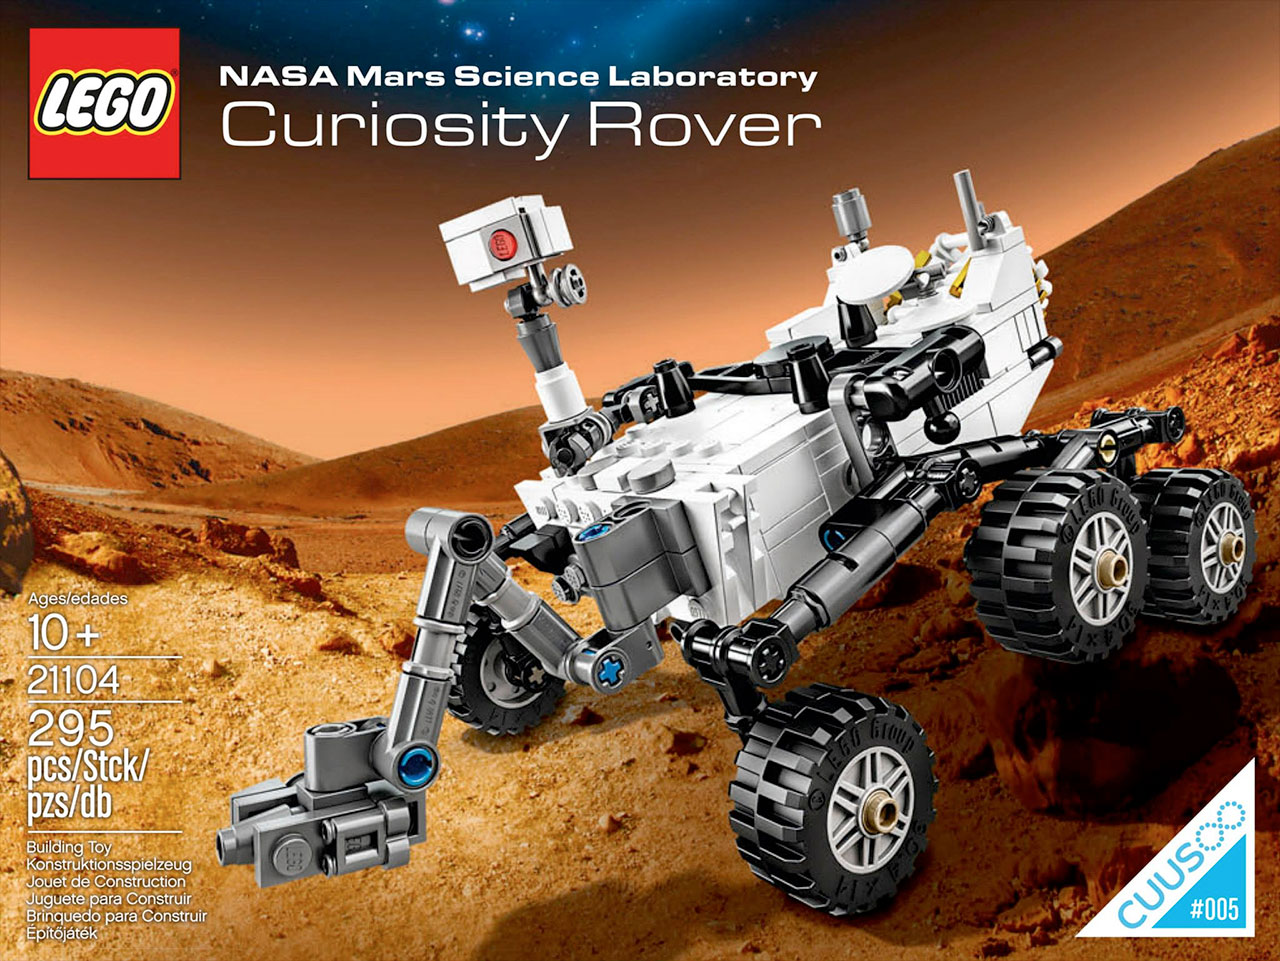 LEGO Launches Mars Curiosity Rover, 5 More Toy Brick Spacecraft Await